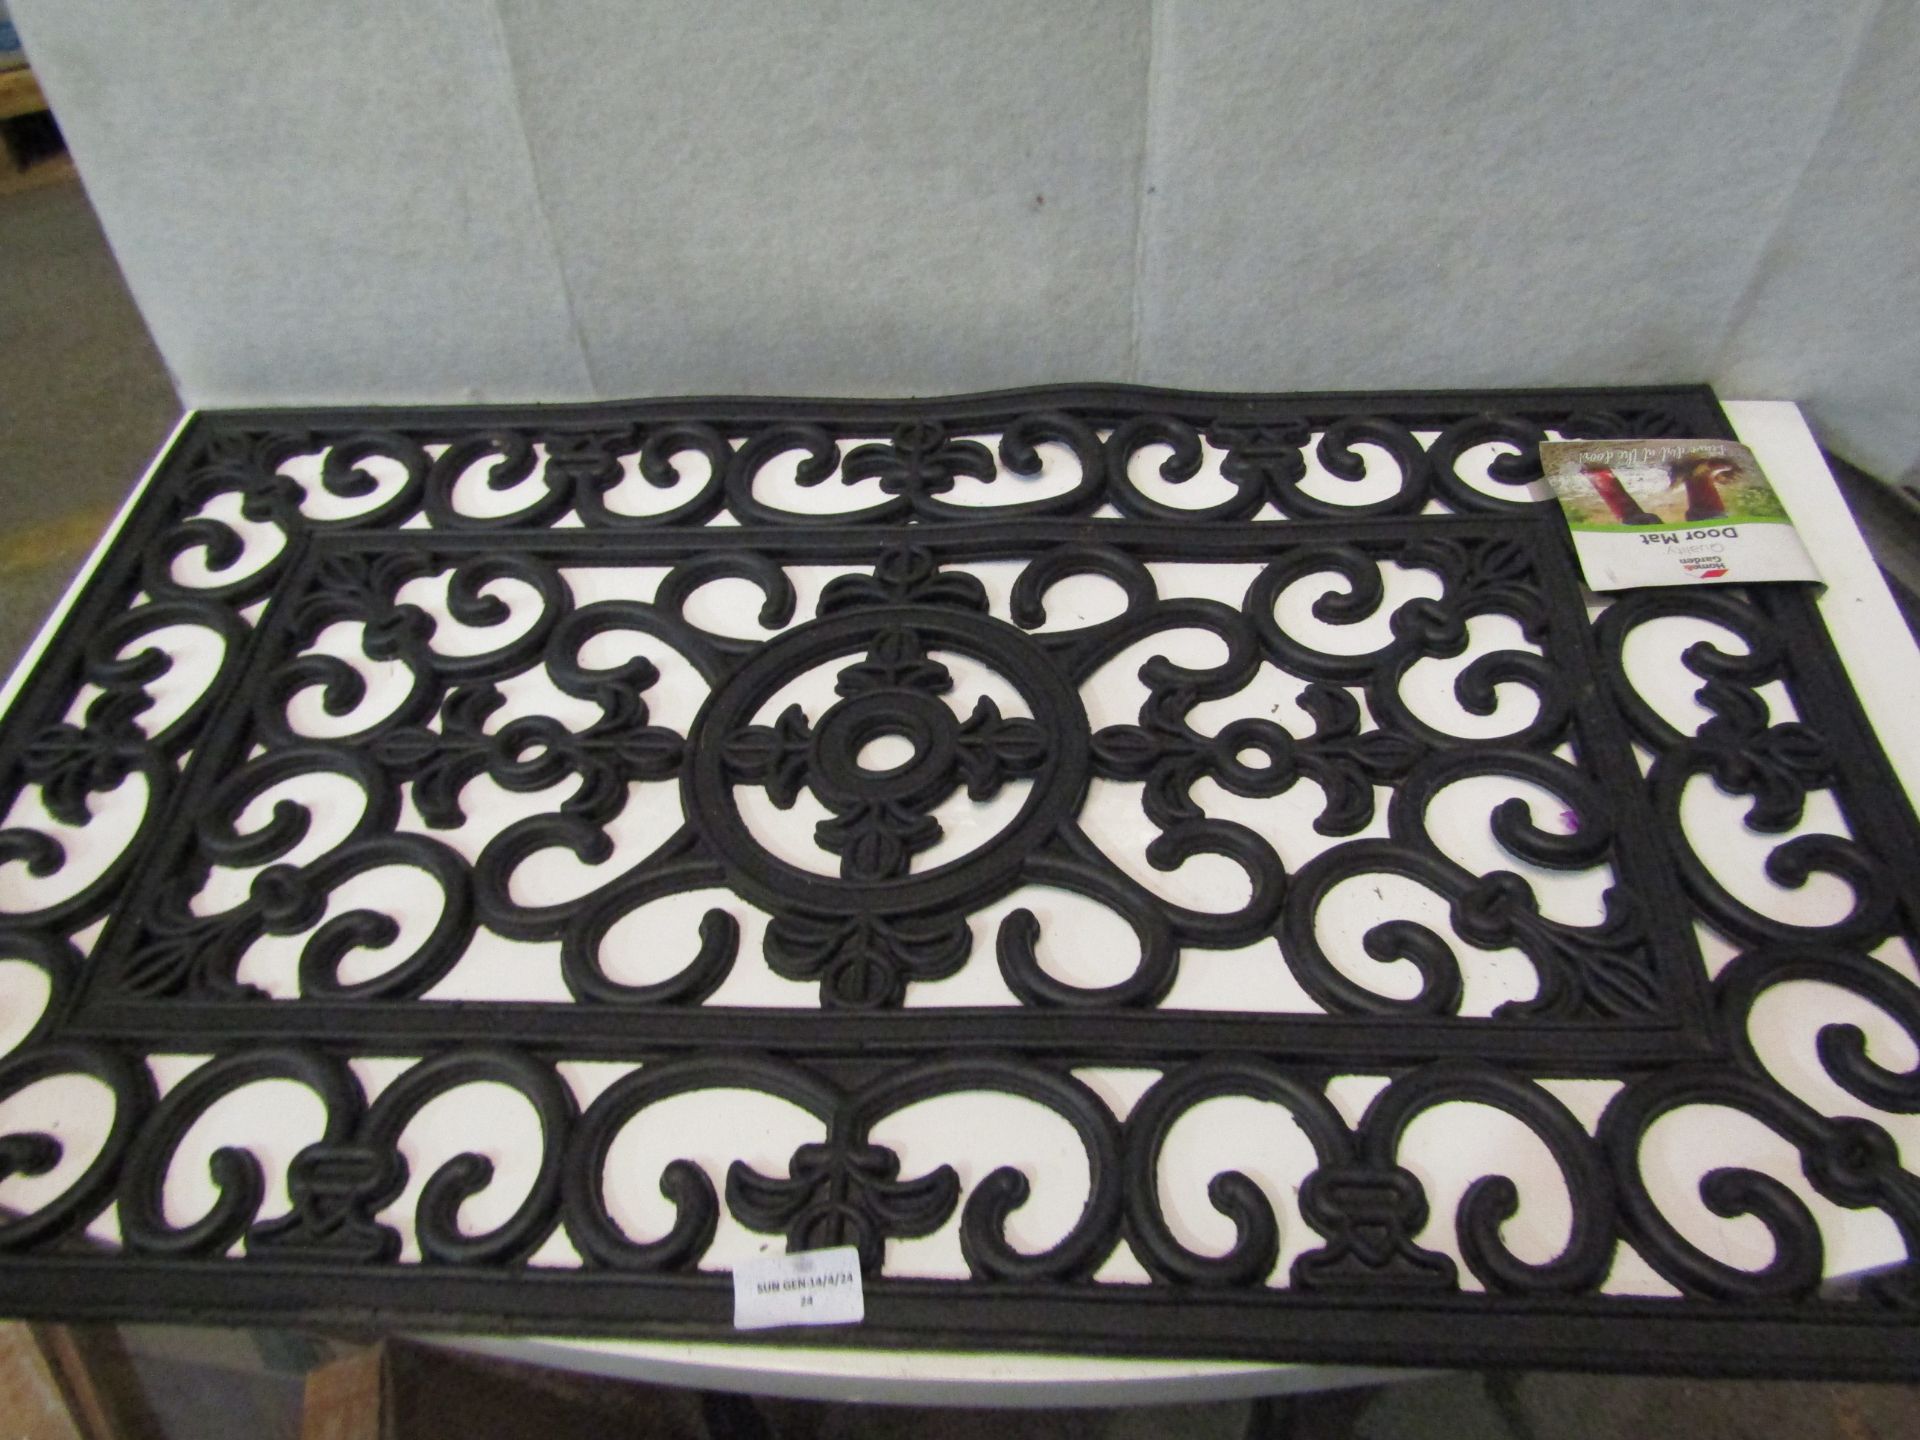 Home & Garden Quality Door Mat, Black - Appears To Be In Good Condition.